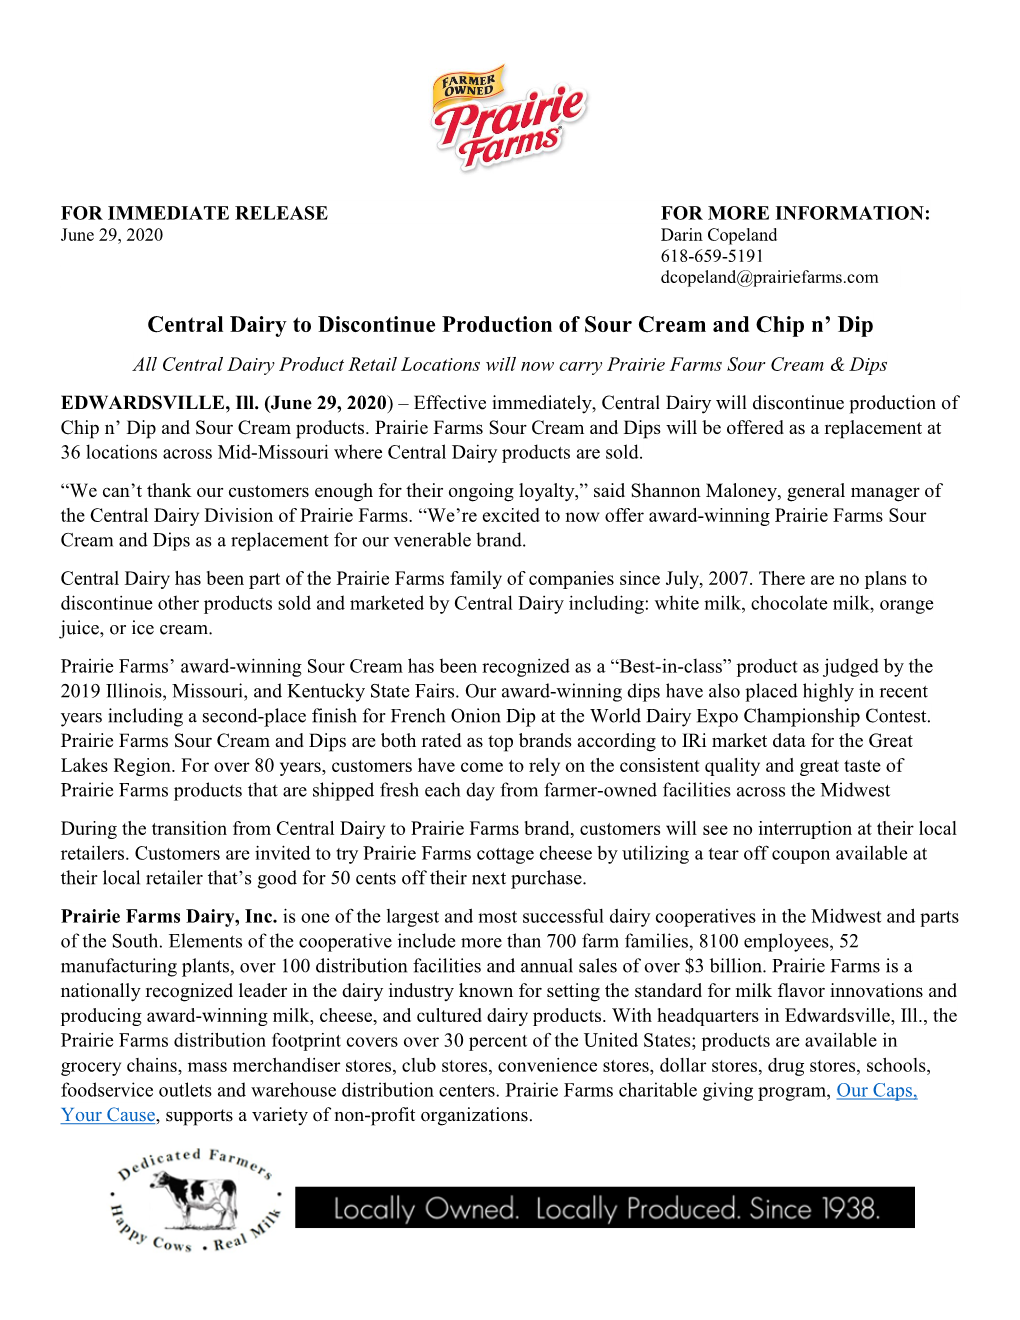 Central Dairy to Discontinue Production of Sour Cream and Chip N'